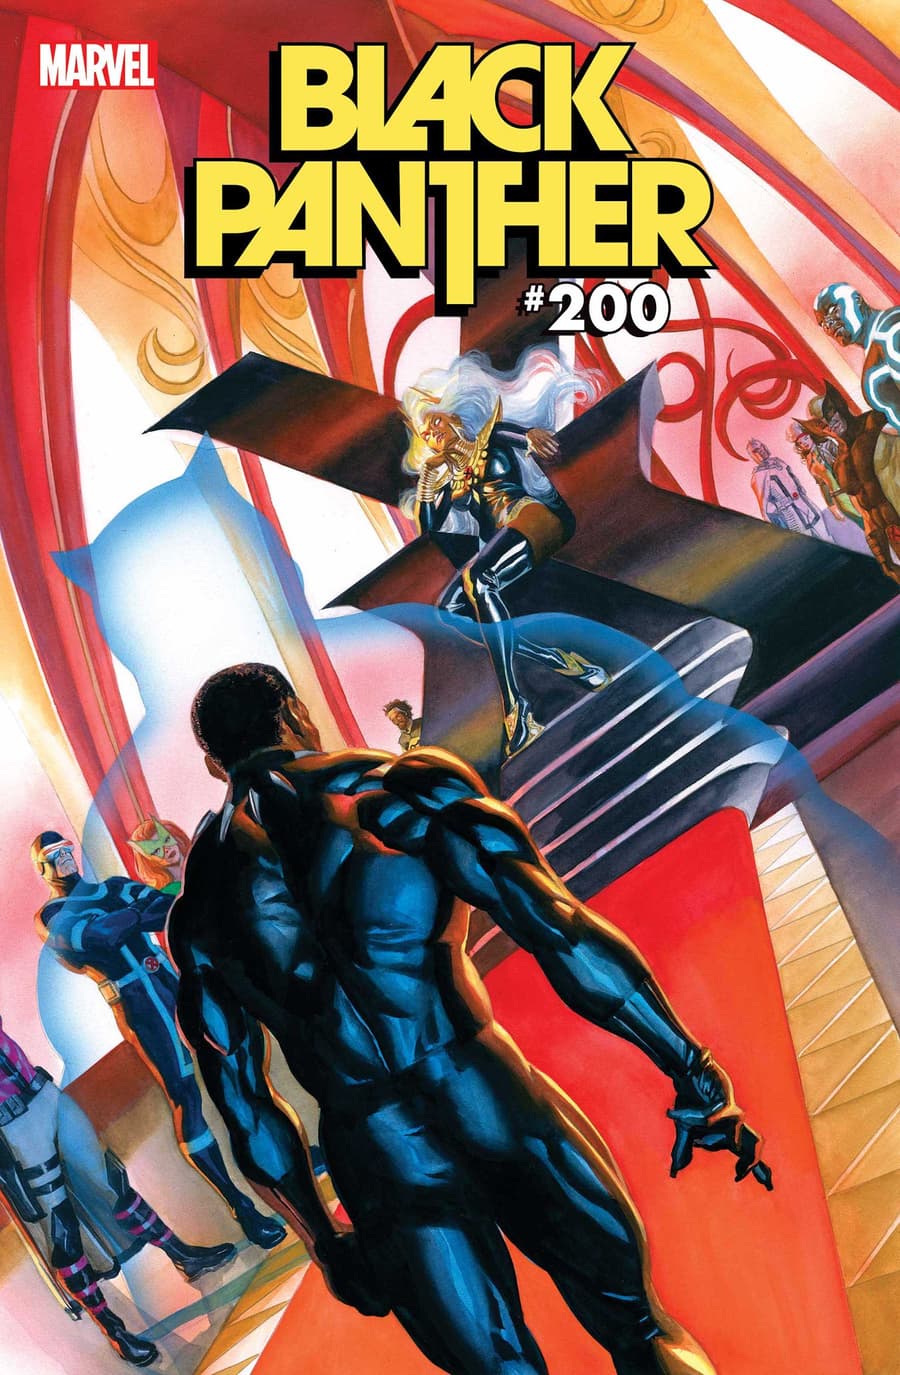 BLACK PANTHER #3 cover by Alex Ross